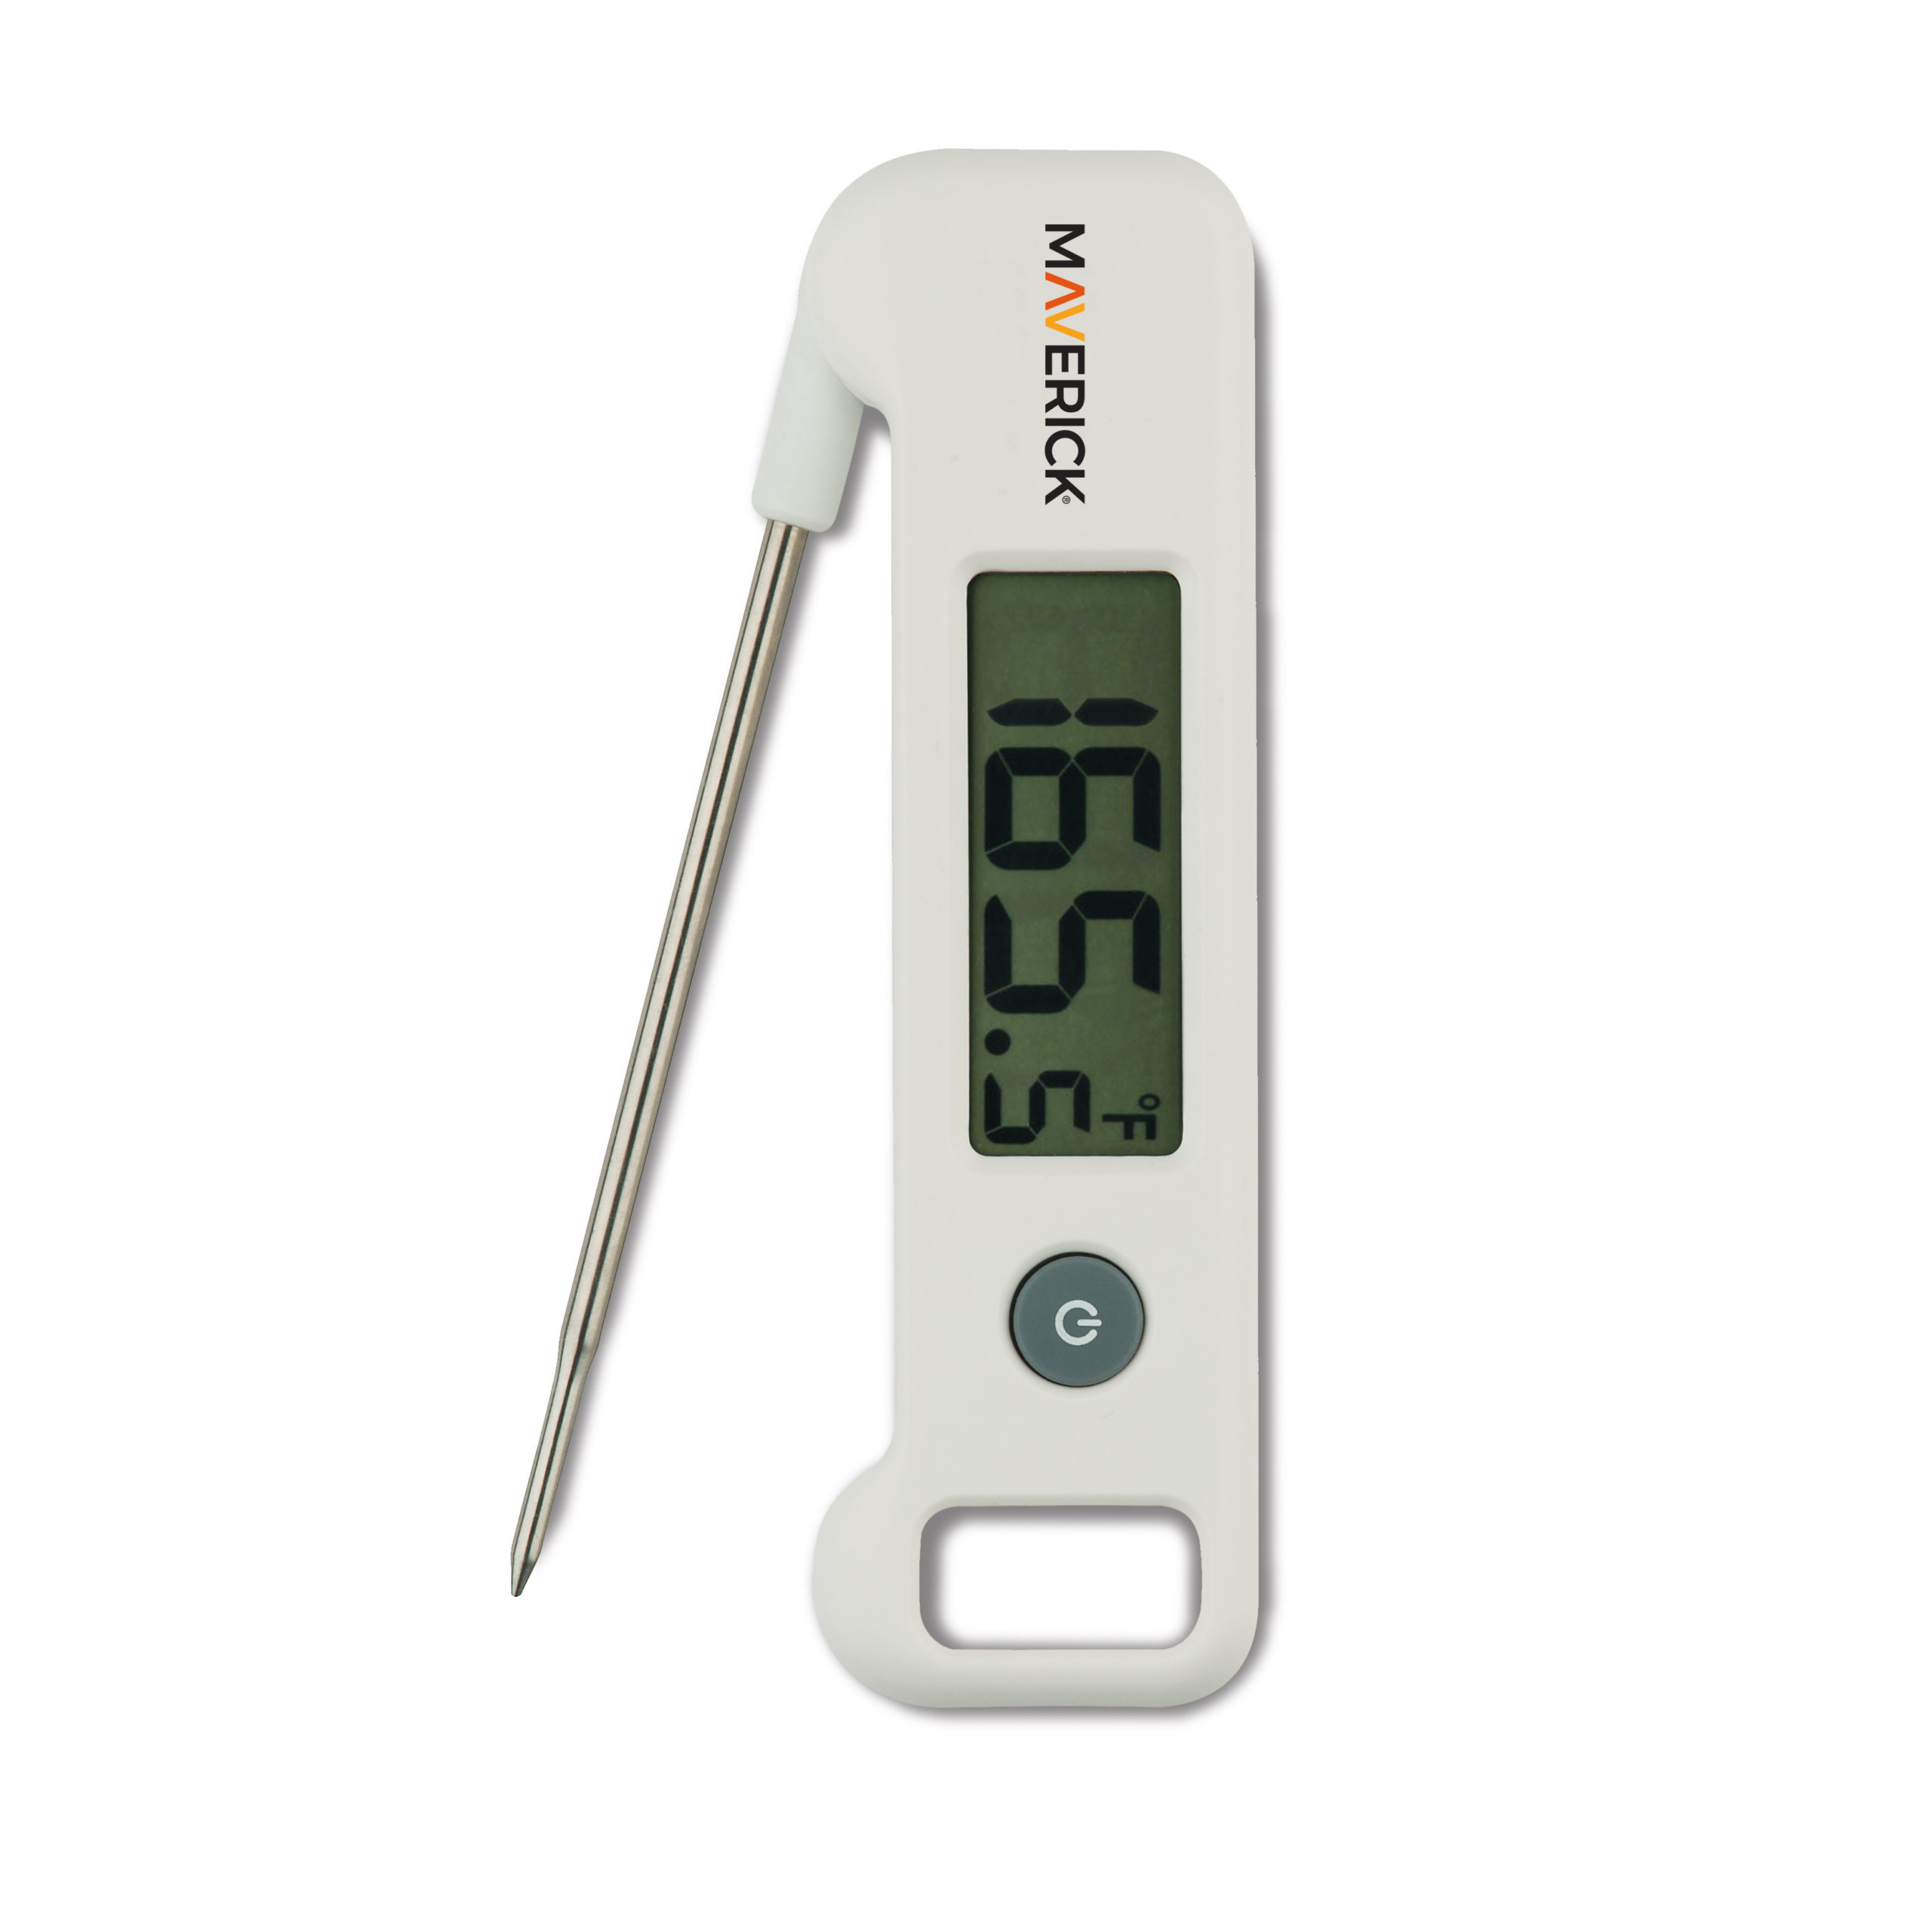 https://www.maverickthermometers.com/wp-content/uploads/2021/05/DT-05_1_product-scaled.jpg